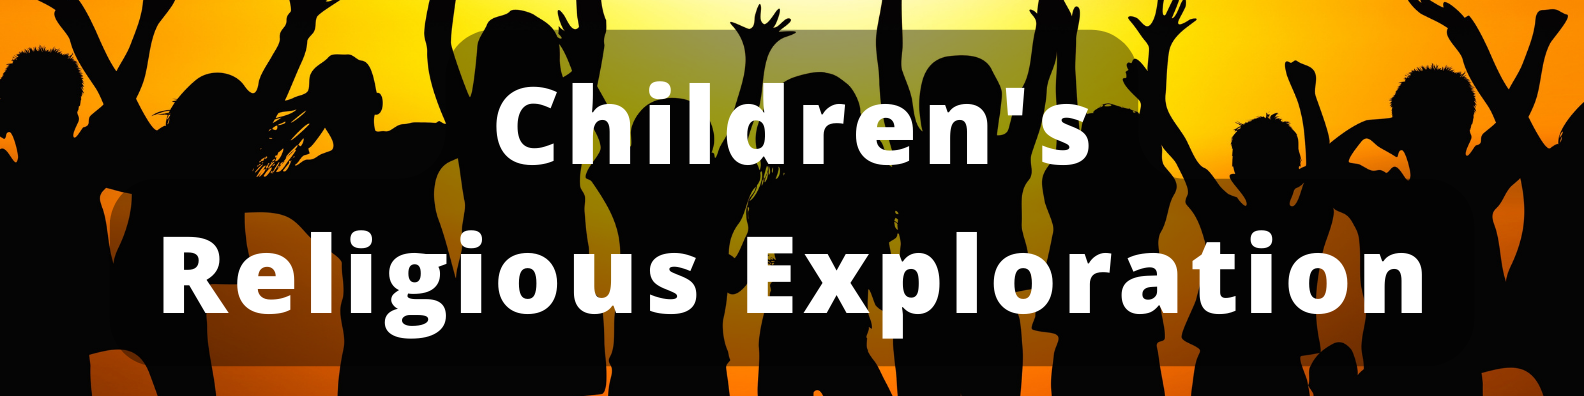 Eleven little kids, most of them in t-shirts, are silhouetted against a bright orange and yellow background, with their arms raised in excitement. The words 